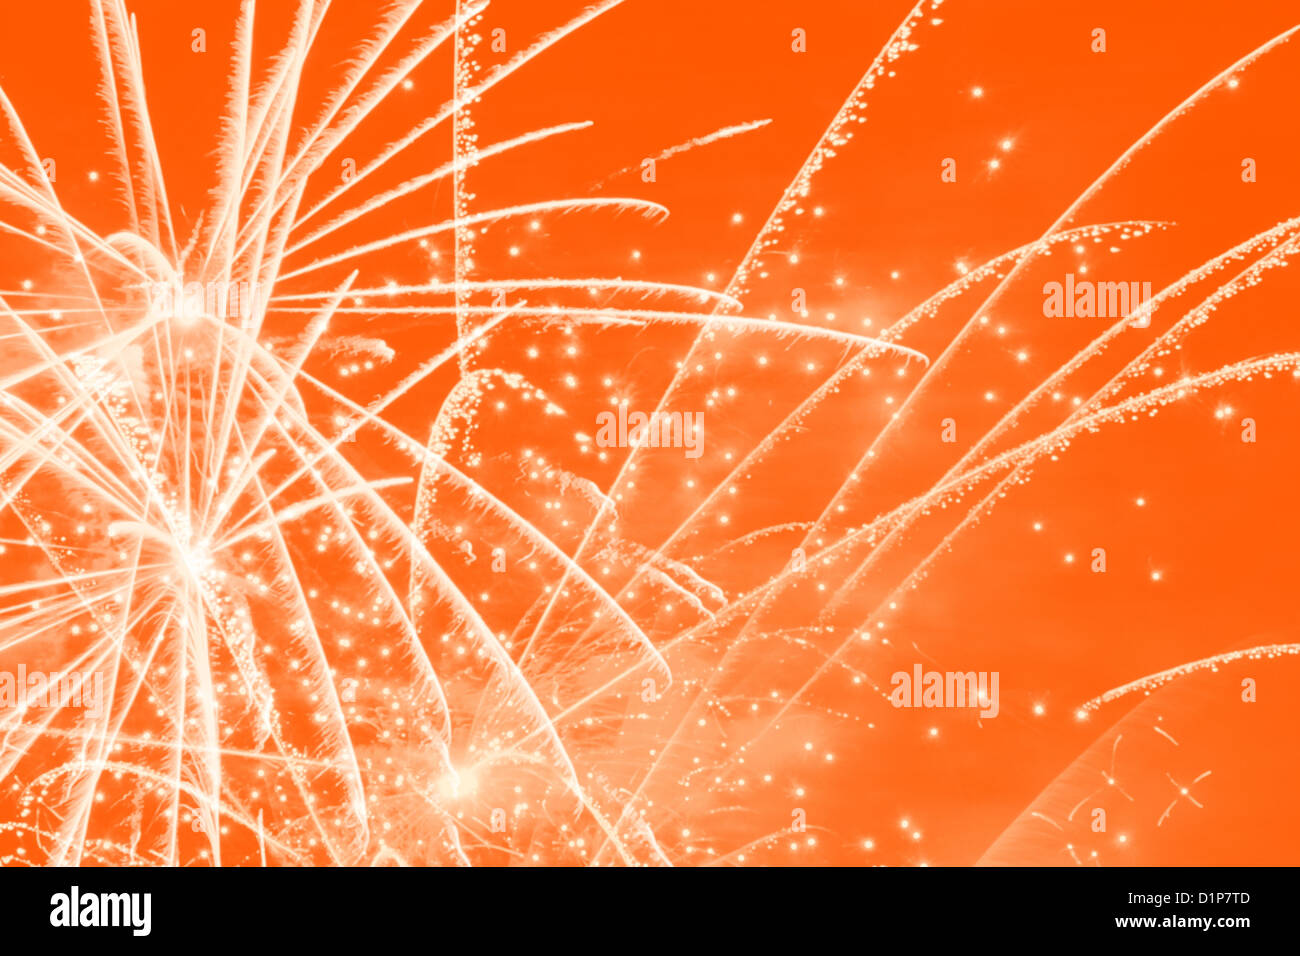 red abstract holiday fireworks background Stock Photo